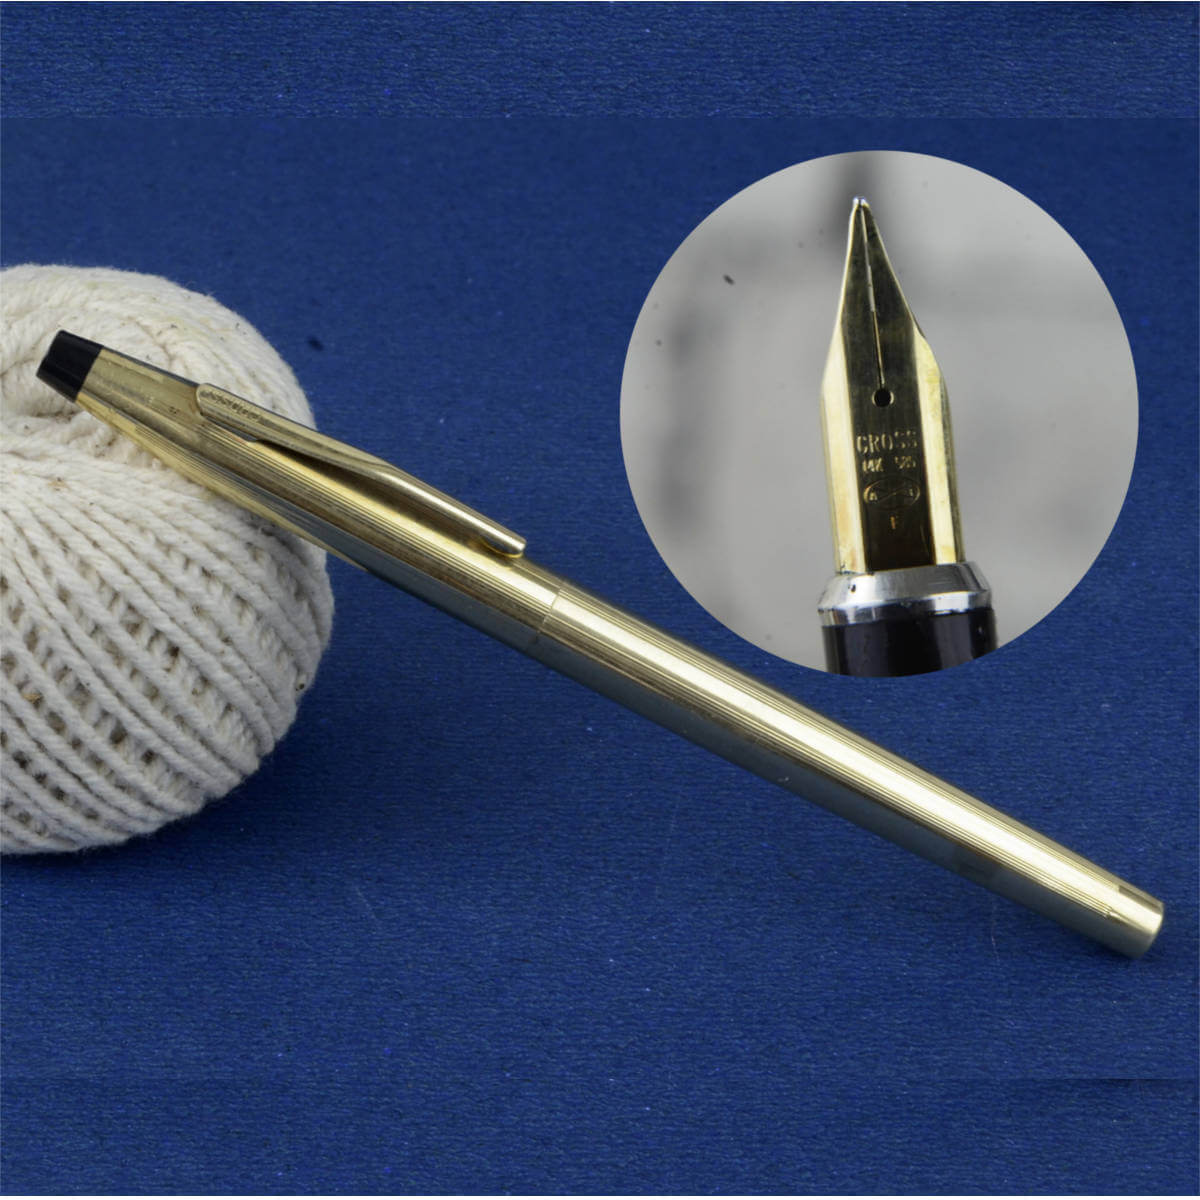 Details about   NEW CROSS RARE 4506 10K GOLD FILLED/ROLLED FOUNTAIN PEN F 14K GOLD NIB+CONVERTER 